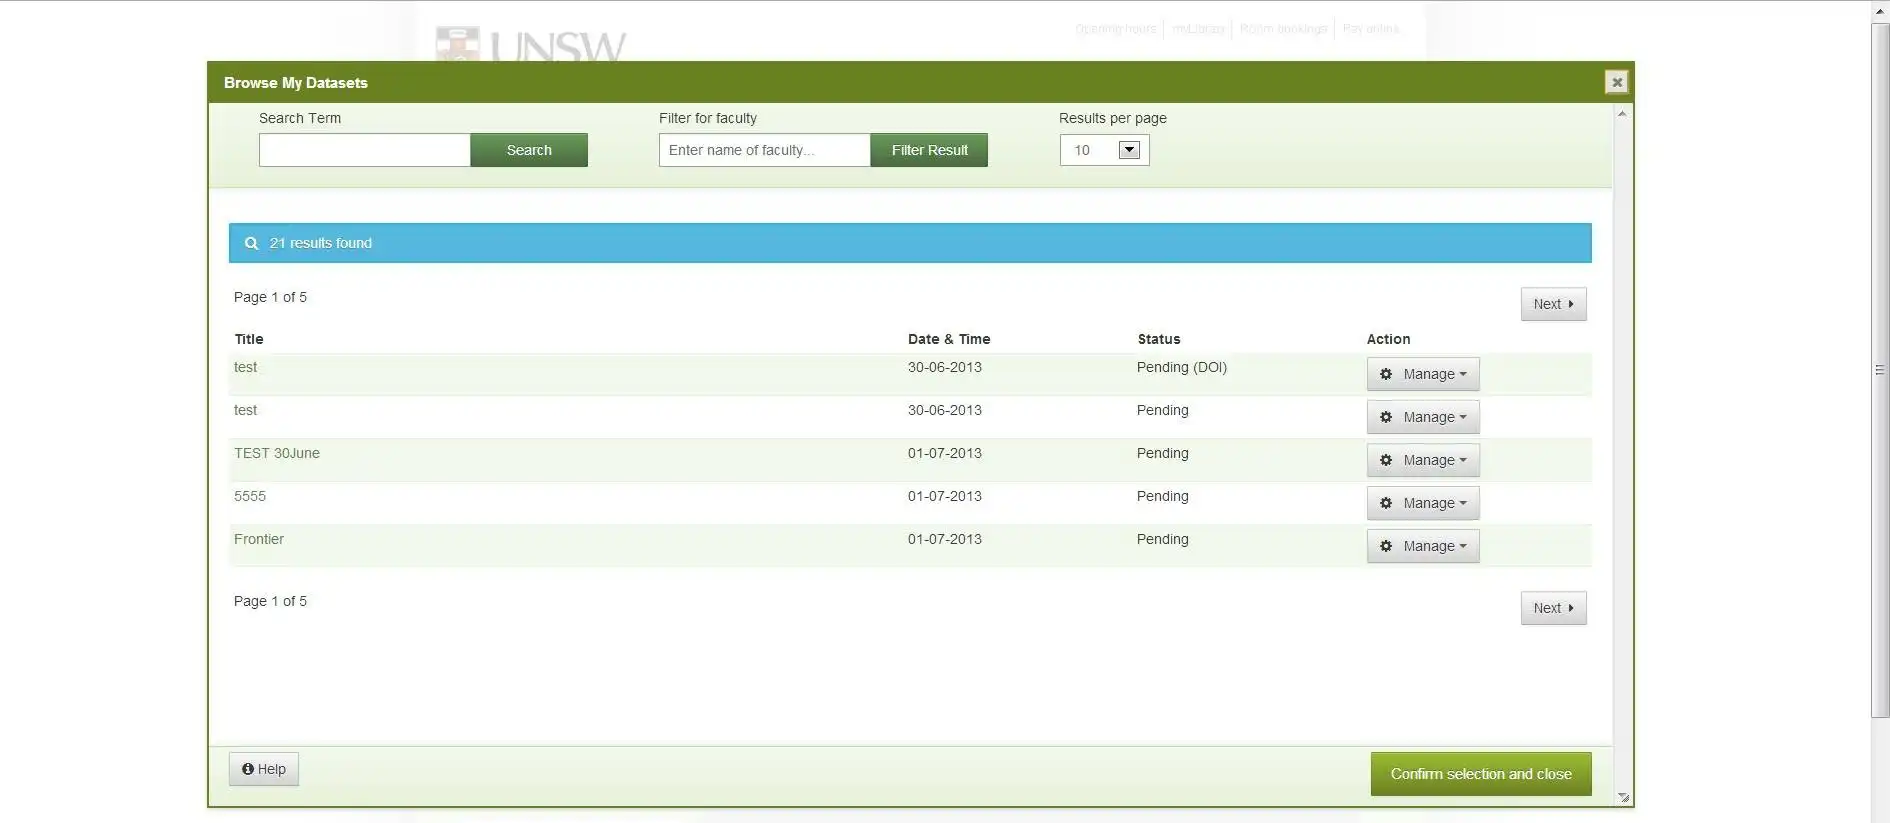 Download web tool or web app UNSW Metadata Stores (ResData) to run in Linux online